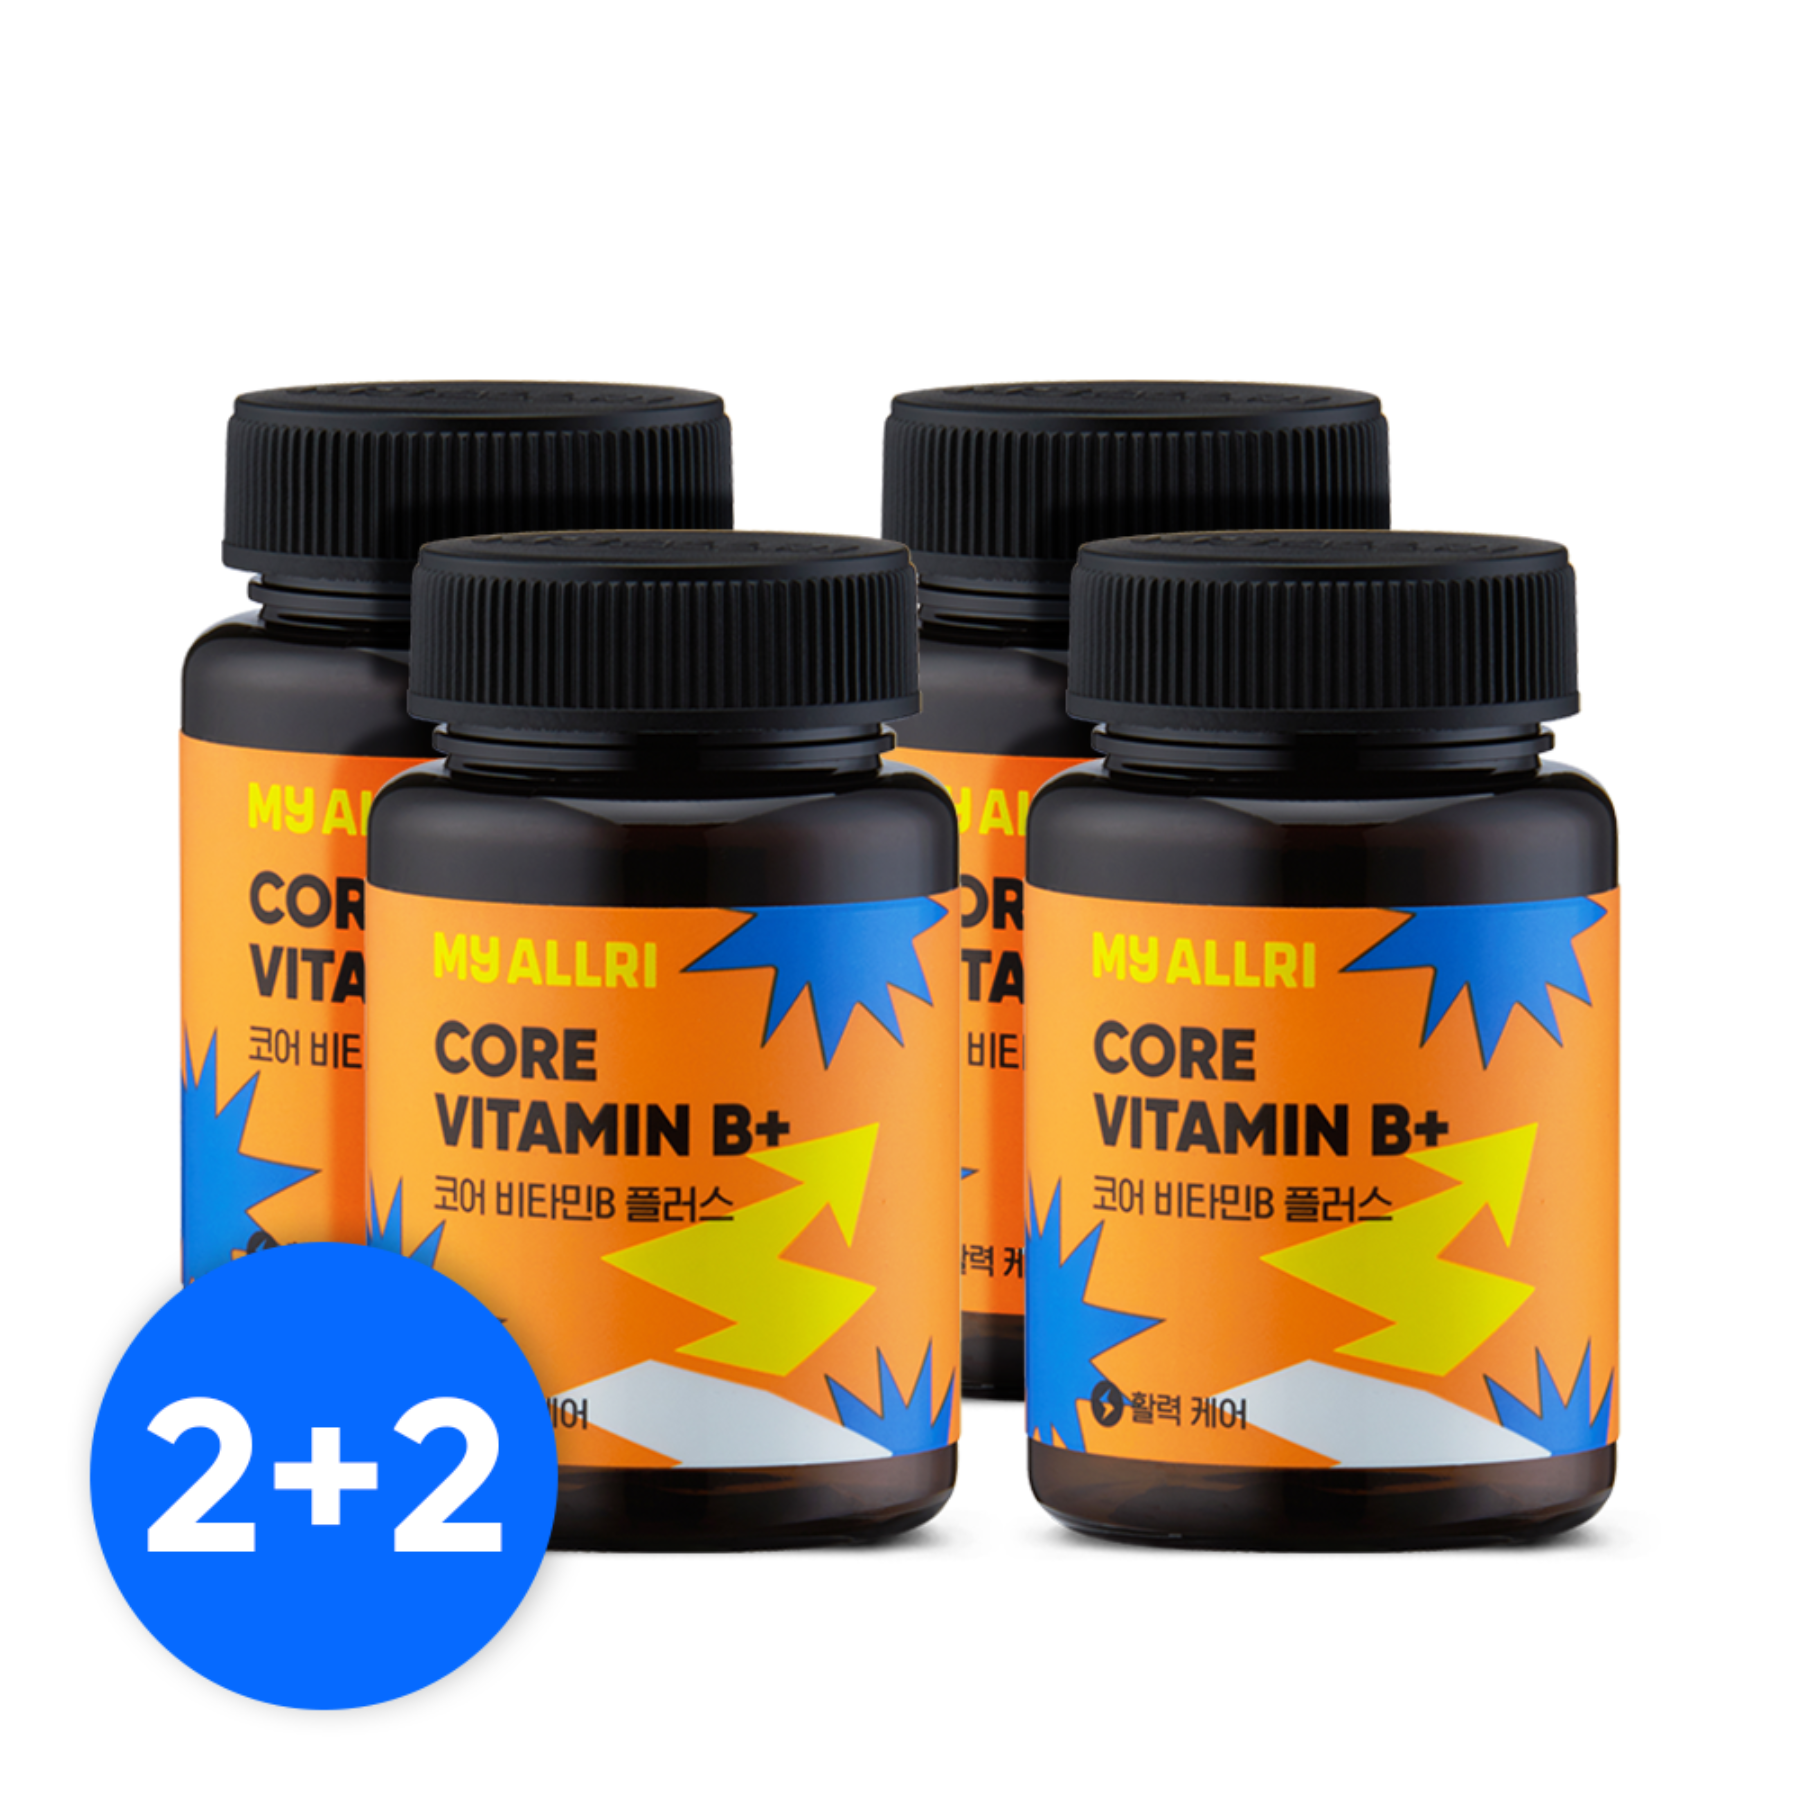 [2+2] Core Vitamin B Plus 1ea for 2 months (total 8 months&#039; supply)